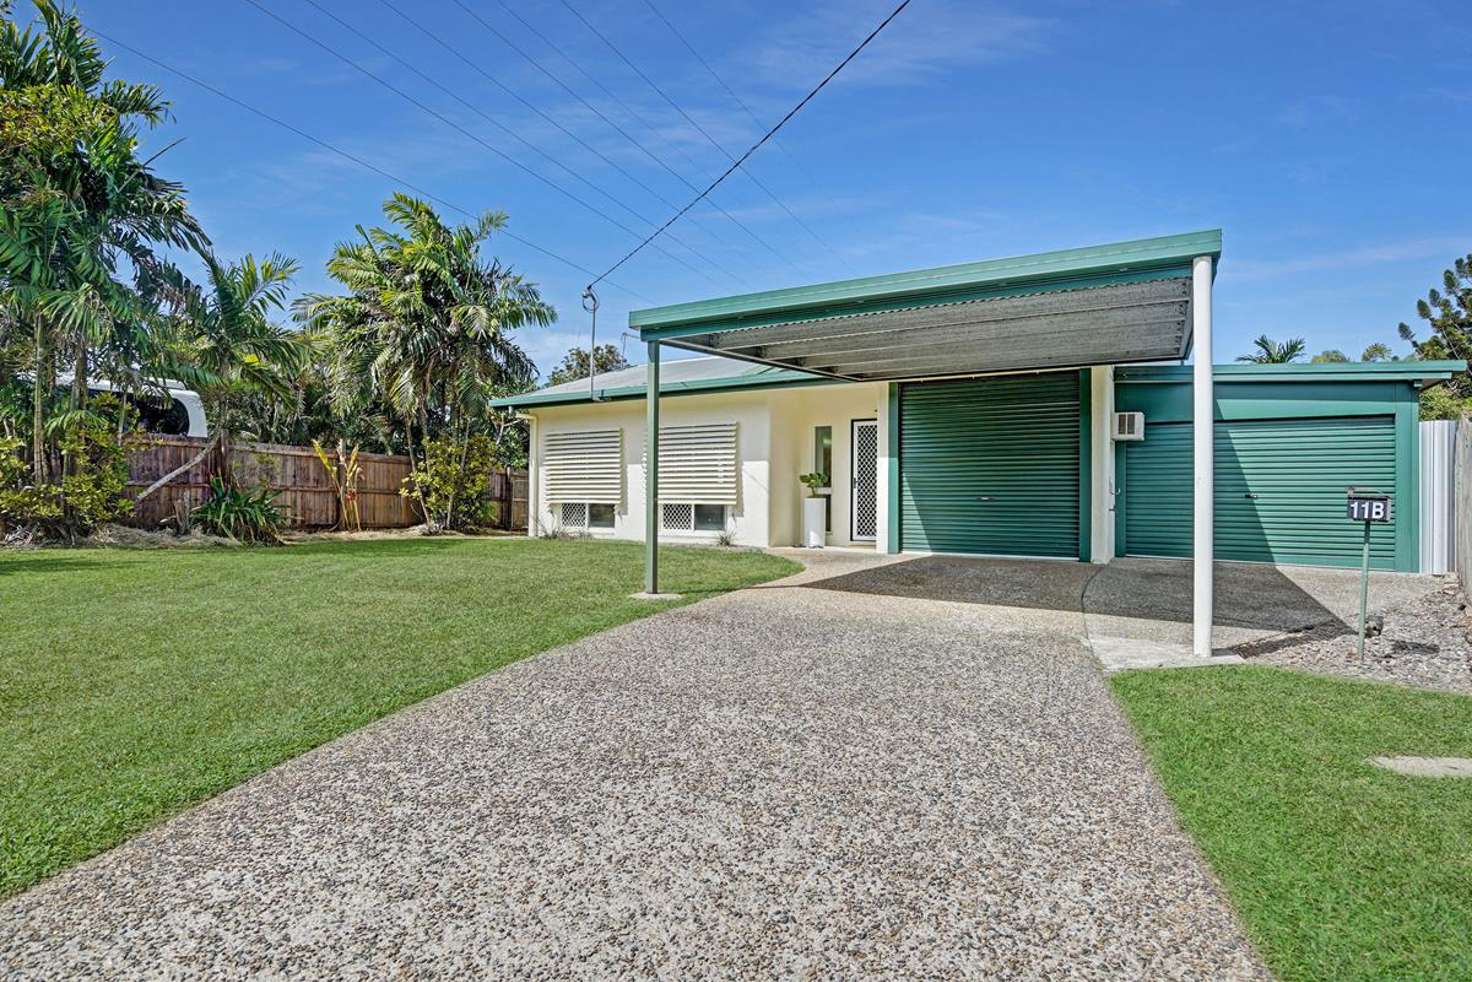 Main view of Homely house listing, 11B Karloo Close, Woree QLD 4868